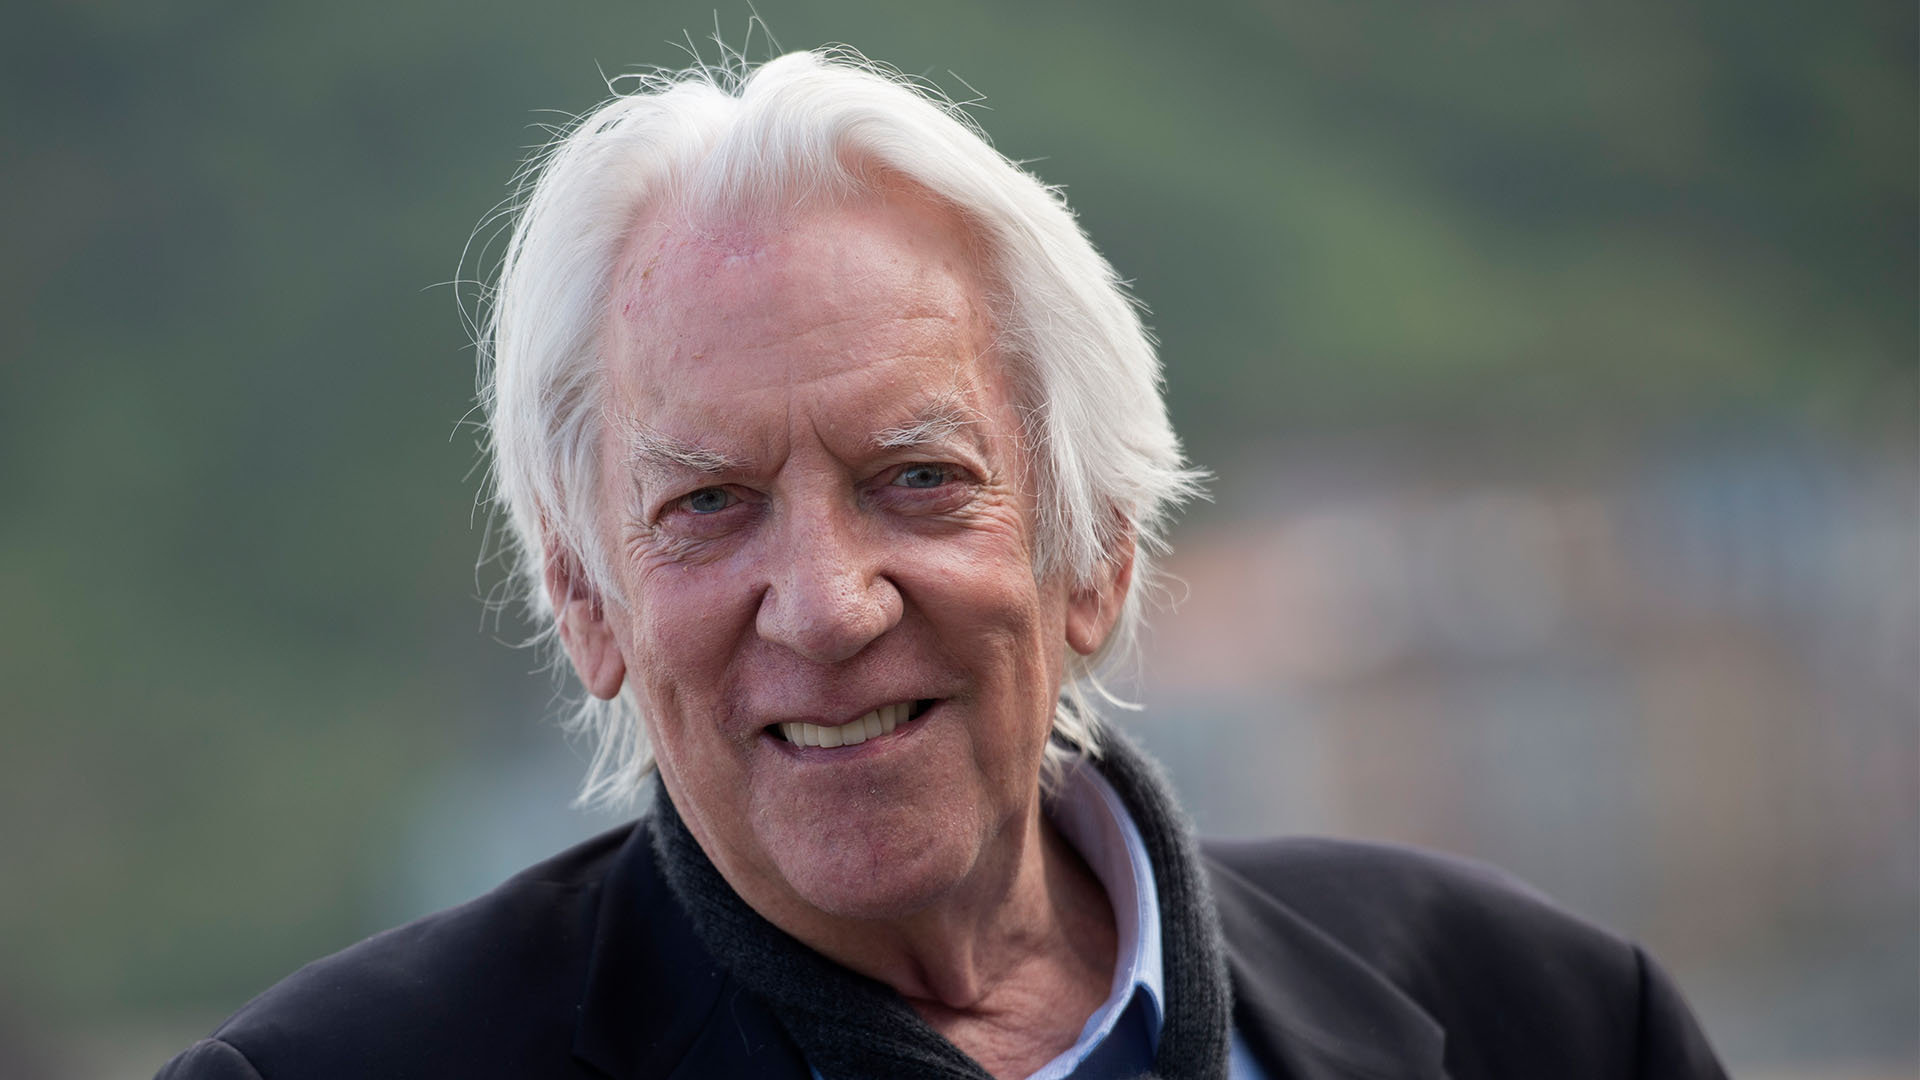 Casting News: Donald Sutherland Joins Sci-Fi Thriller 'Moonfall'